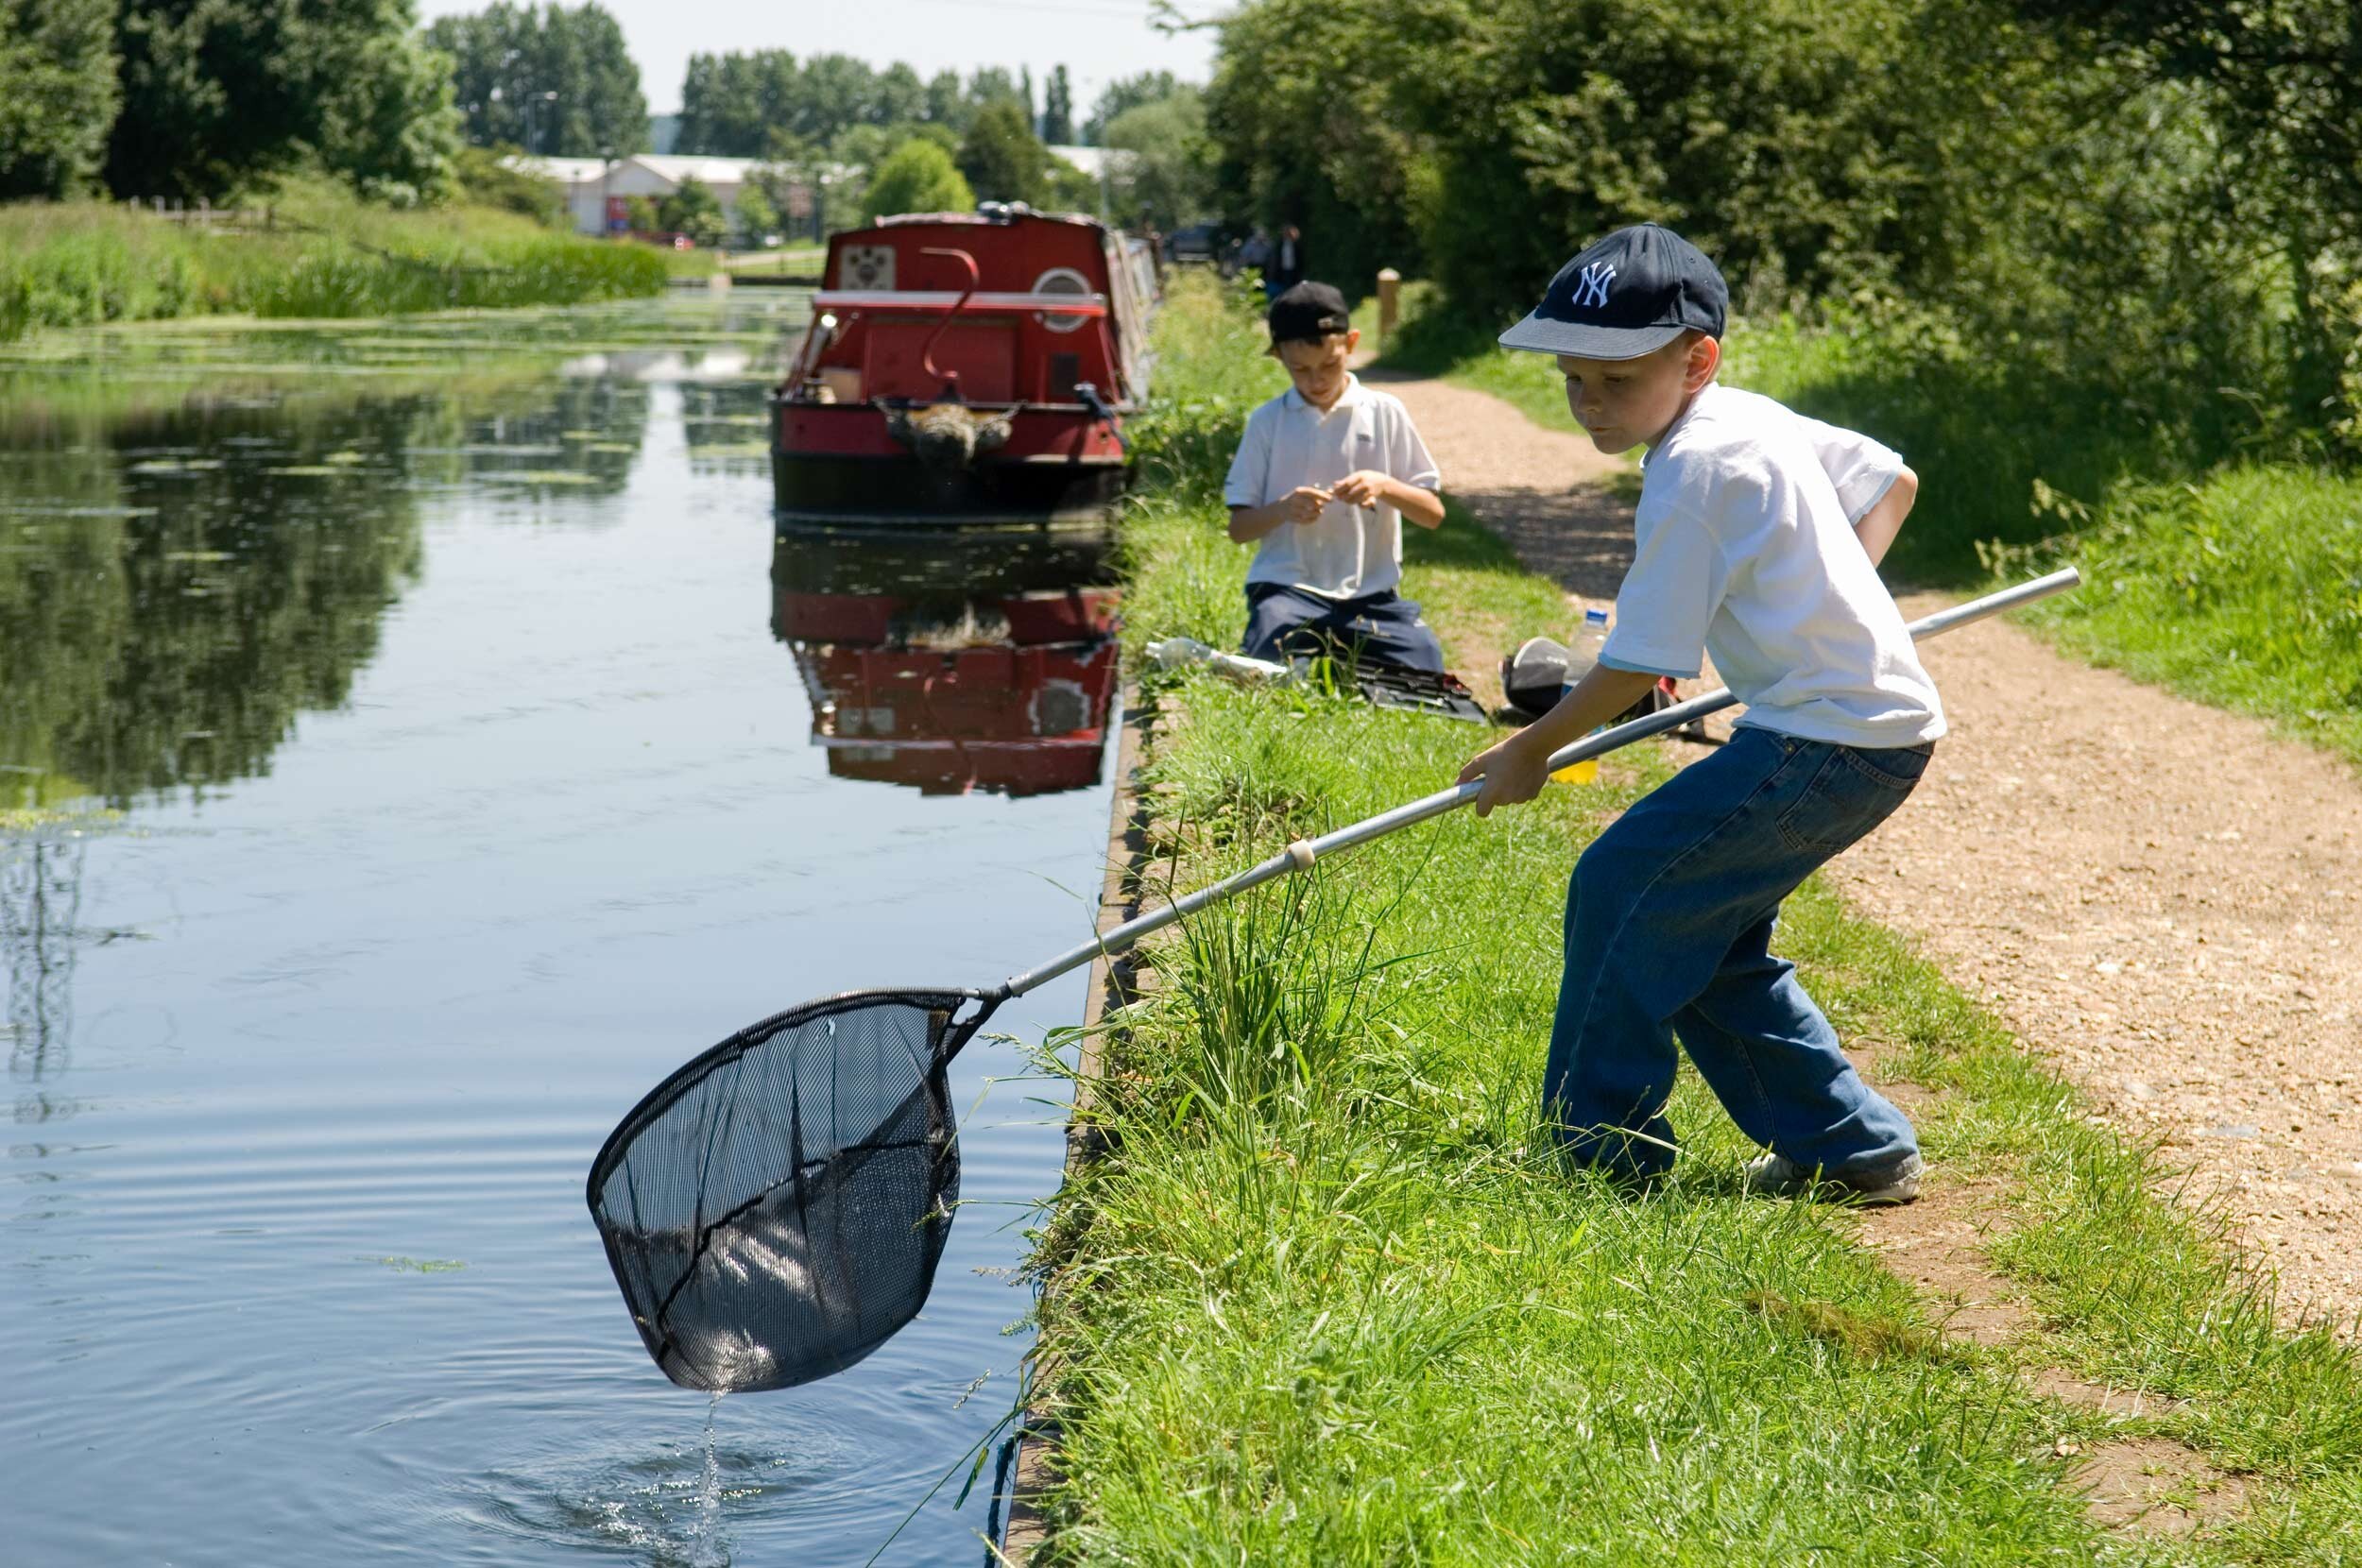  Lee Valley Park. Boys fishing, River Lee Country Park near Cheshunt.  Shot by Eleanor Bentall, photographer.  